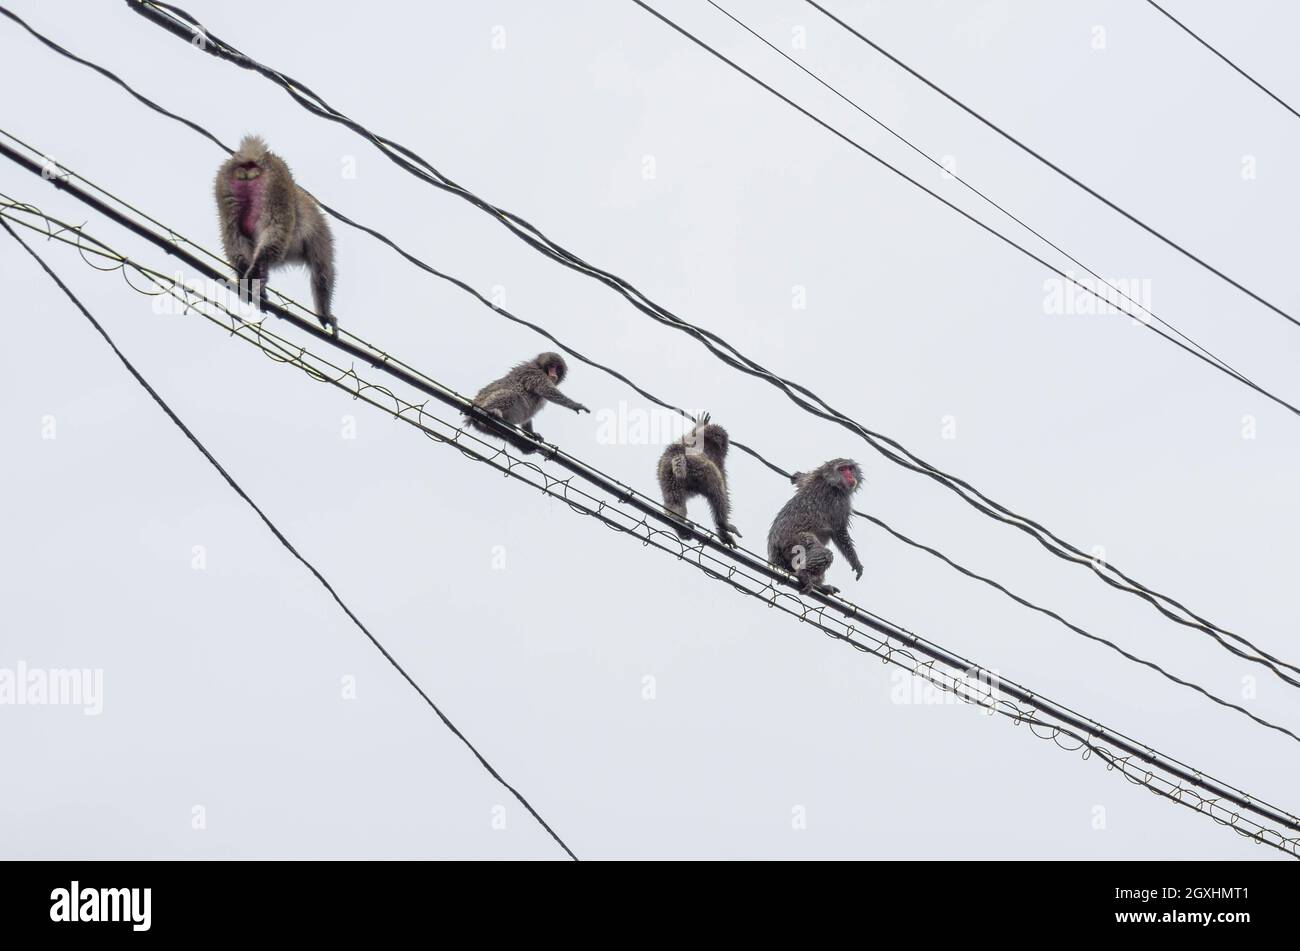 A family of Japanese macaques travelling along overhead power lines near the Grandeco Ski Resort in Fukushima Prefecture, Japan Stock Photo